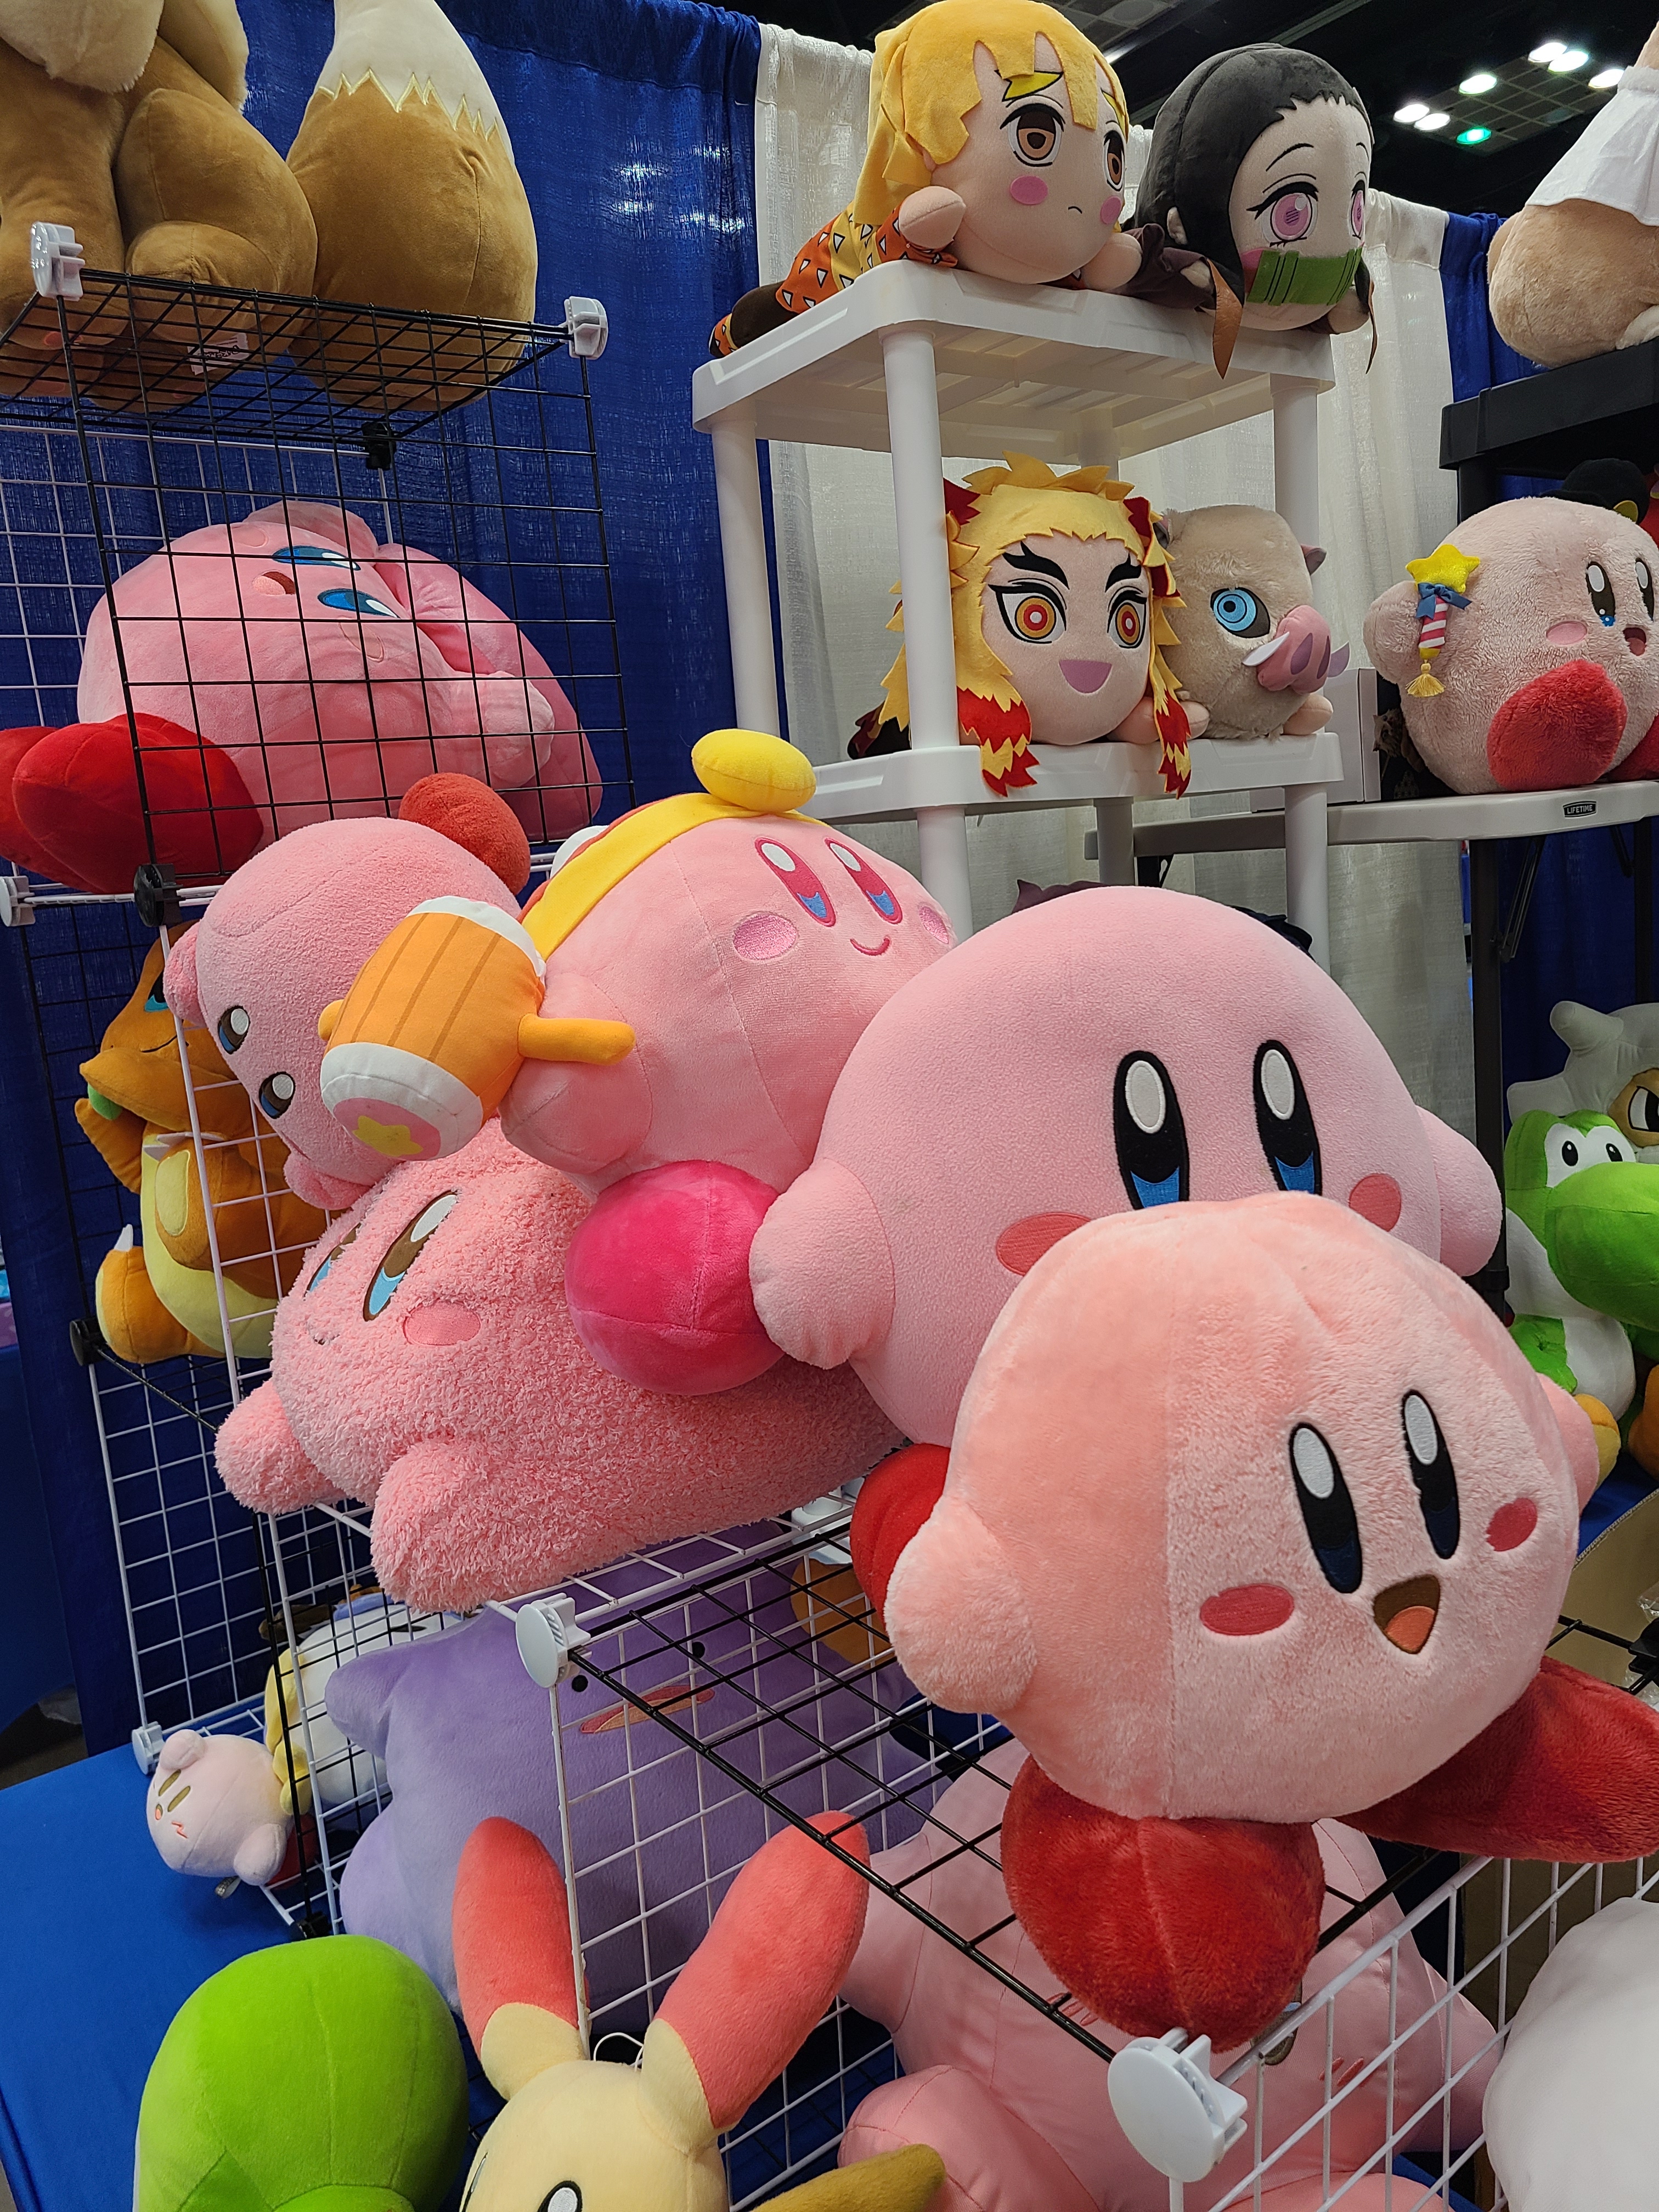 many different types of kirbies at the plush king's booth